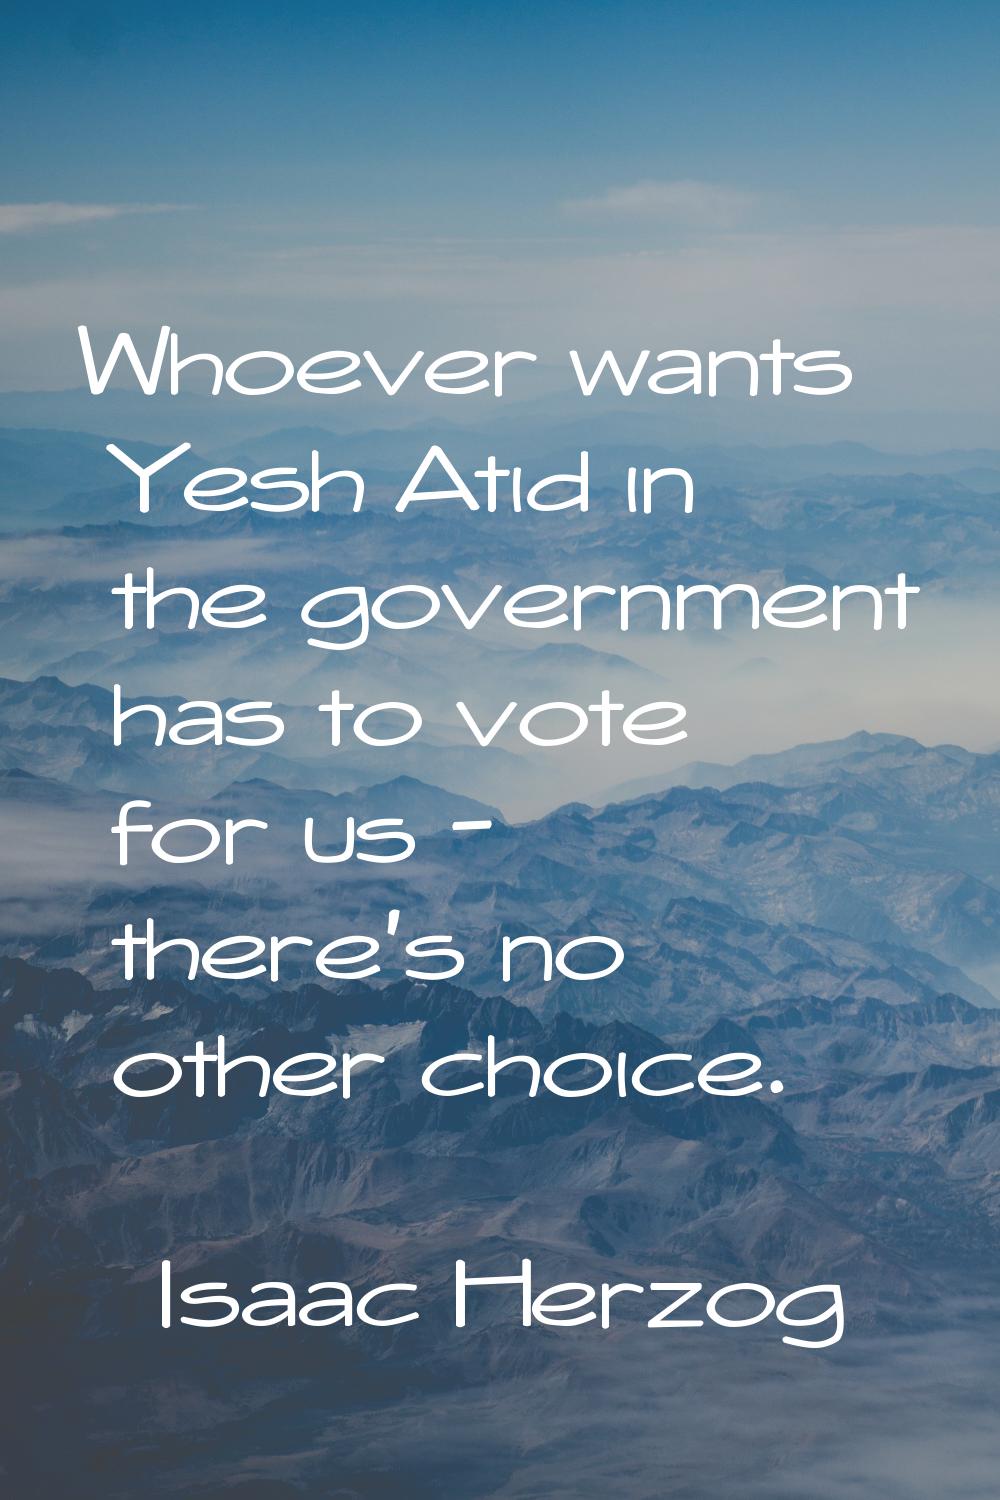 Whoever wants Yesh Atid in the government has to vote for us - there's no other choice.